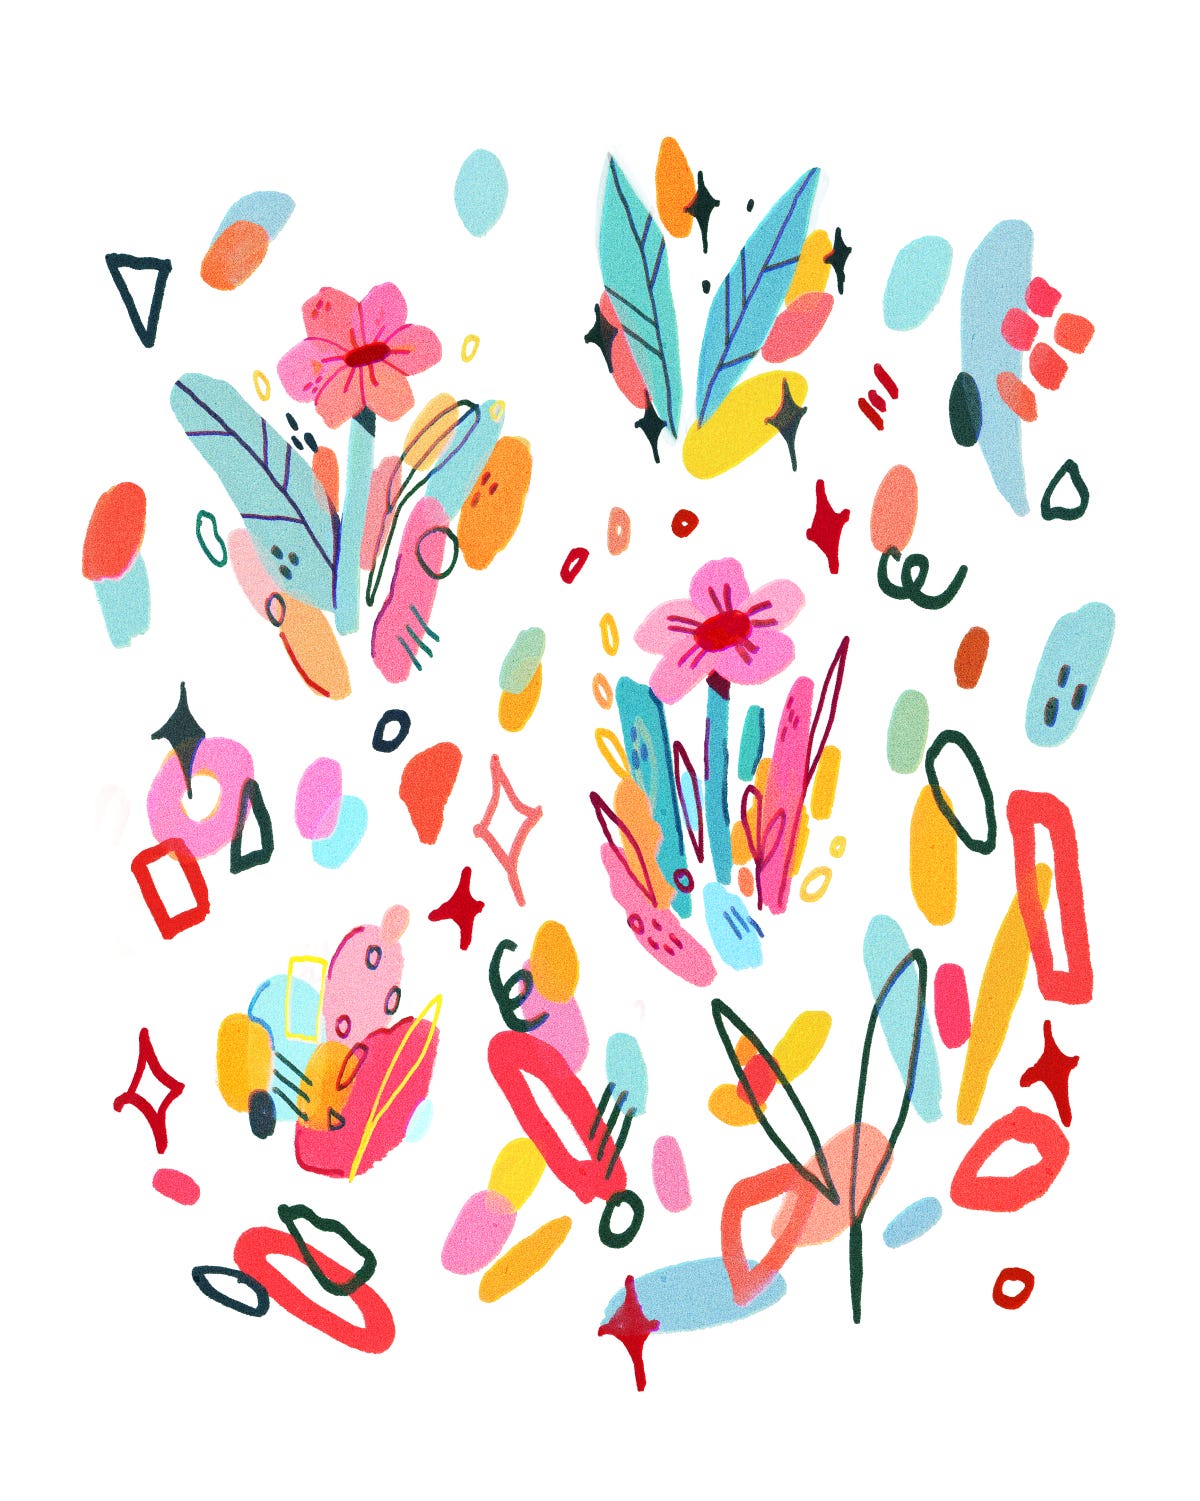 A combination of digitally drawn abstract shapes and flowers.